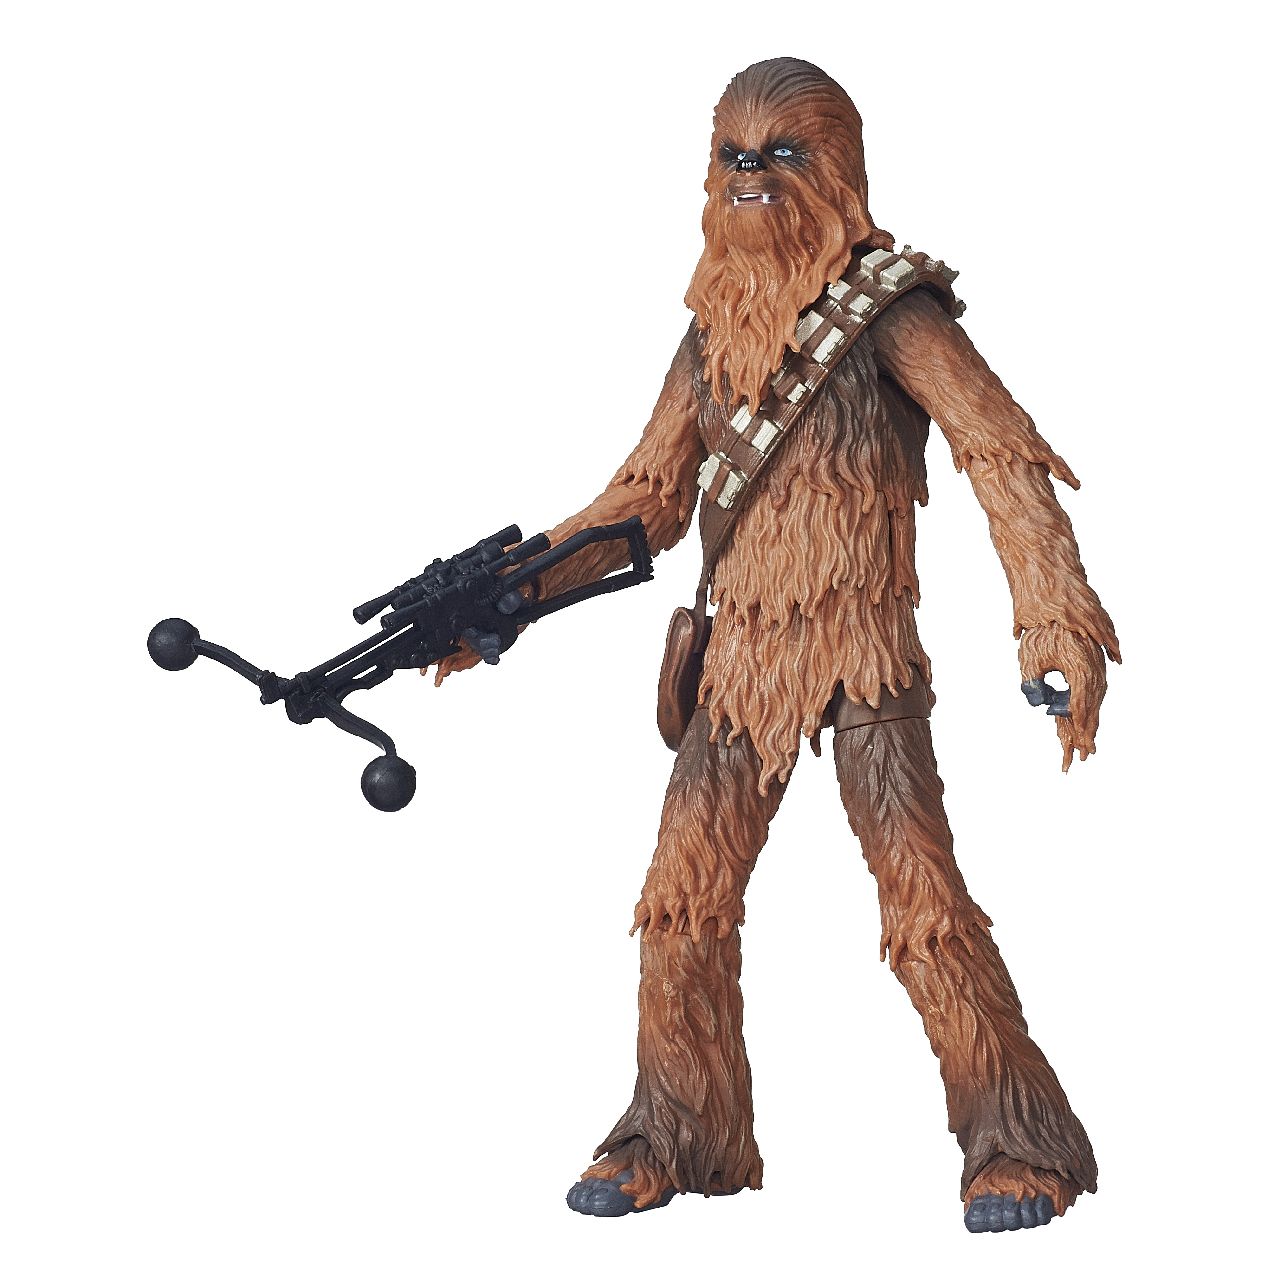 Star Wars: The Force Awakens Toys 